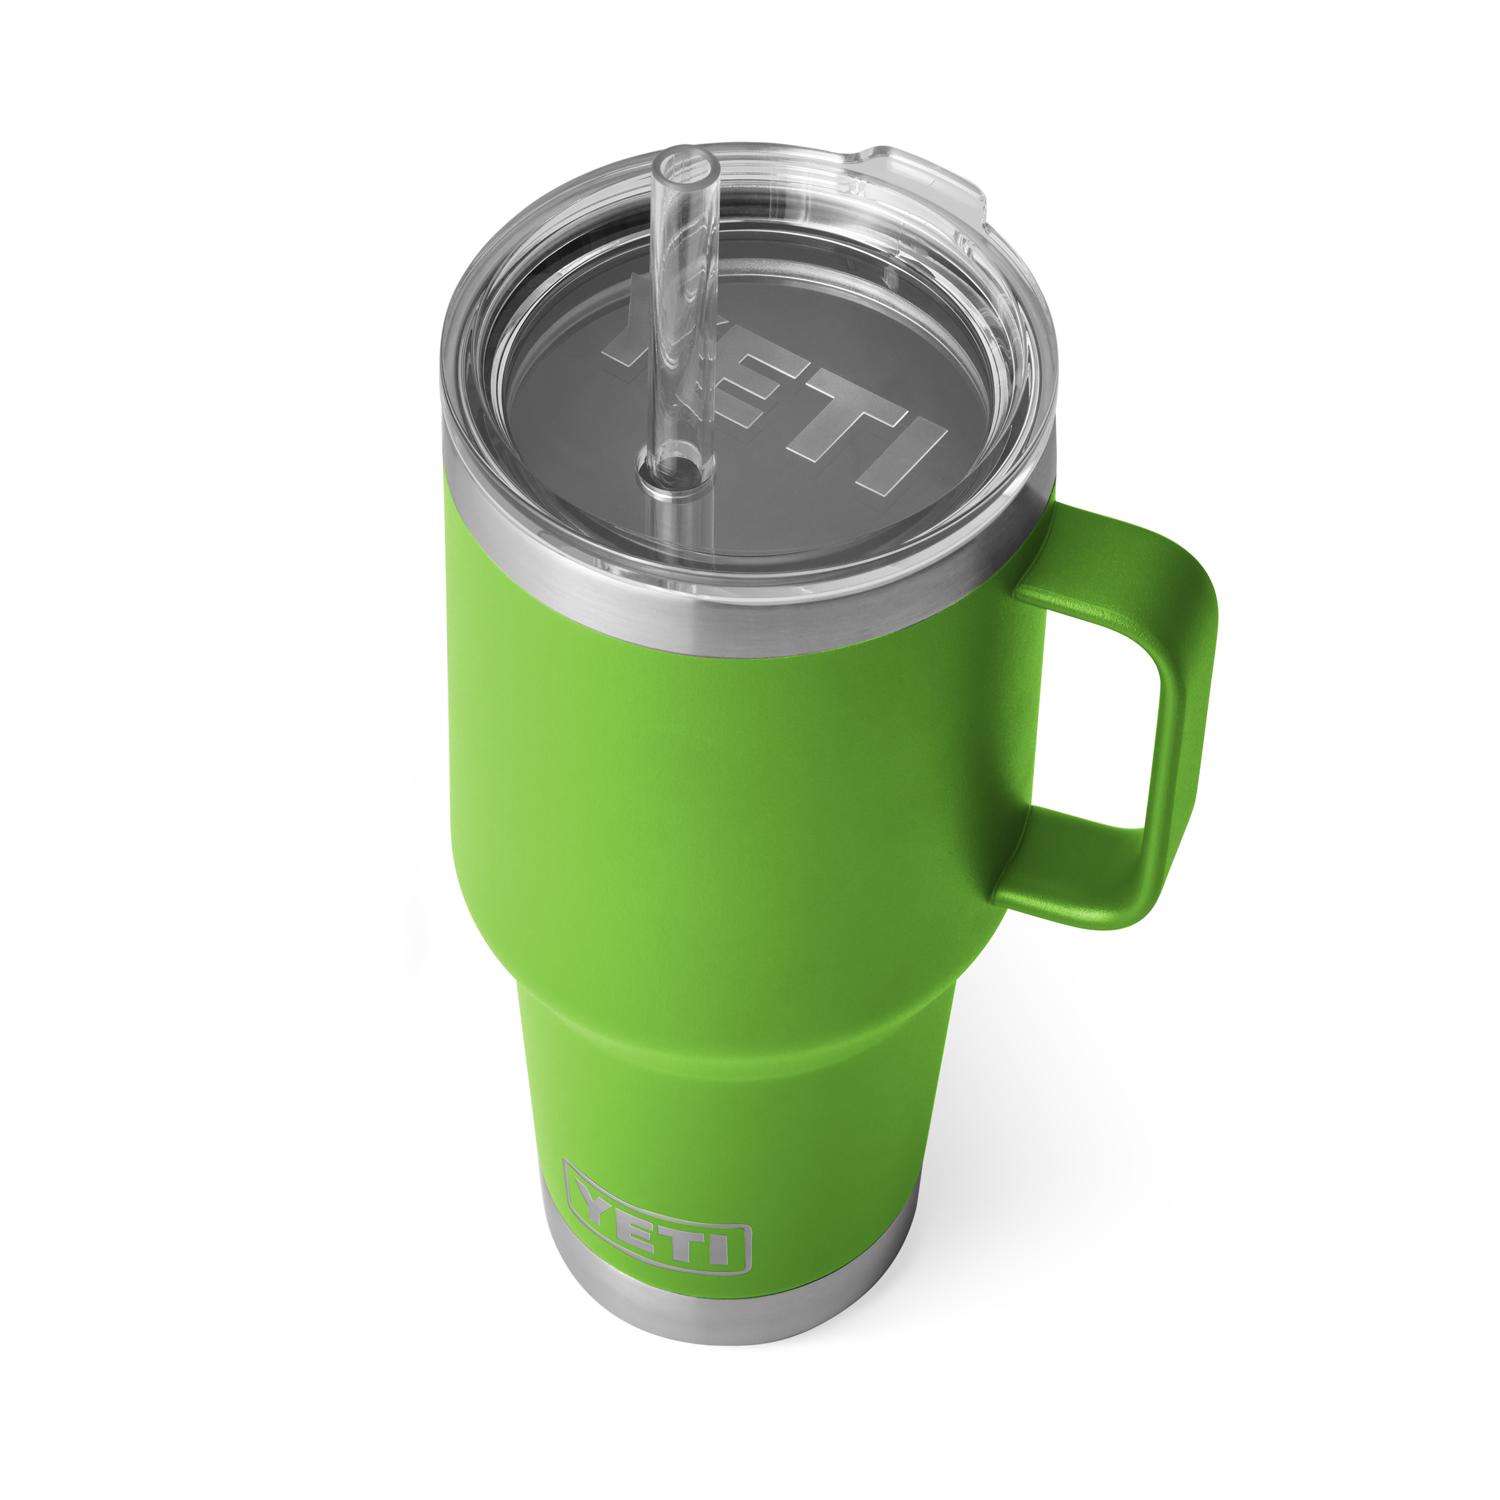 YETI Rambler 26 oz Straw Cup, Vacuum Insulated, Stainless  Steel with Straw Lid, Canopy Green: Tumblers & Water Glasses